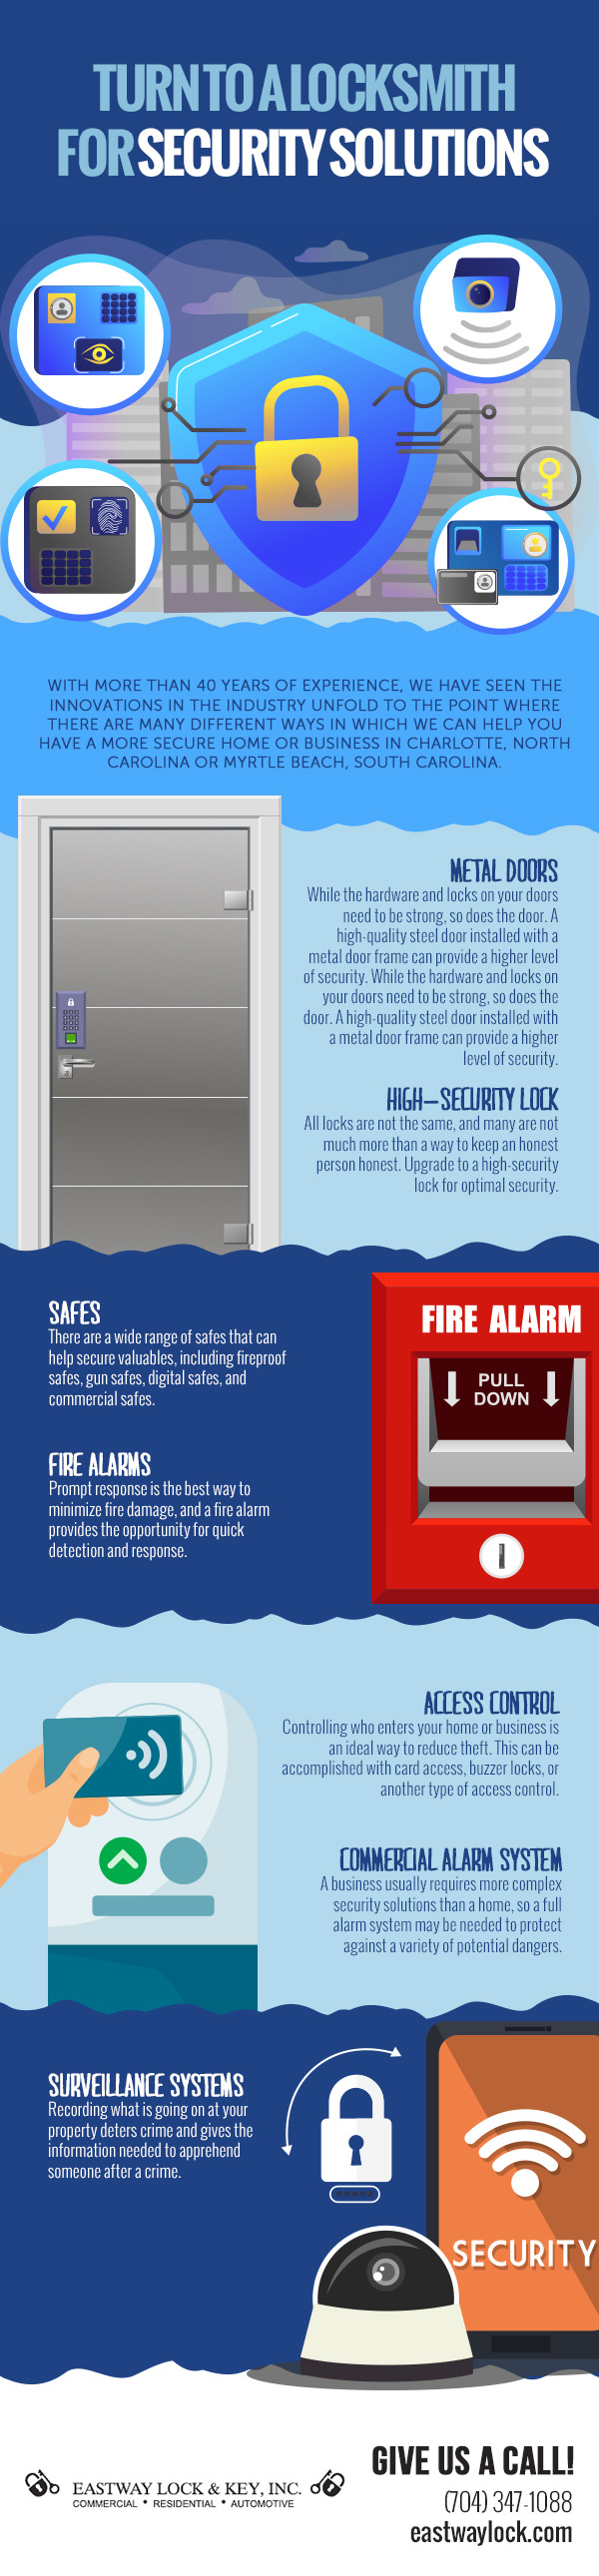 Turn to a Locksmith for Security Solutions [infographic]